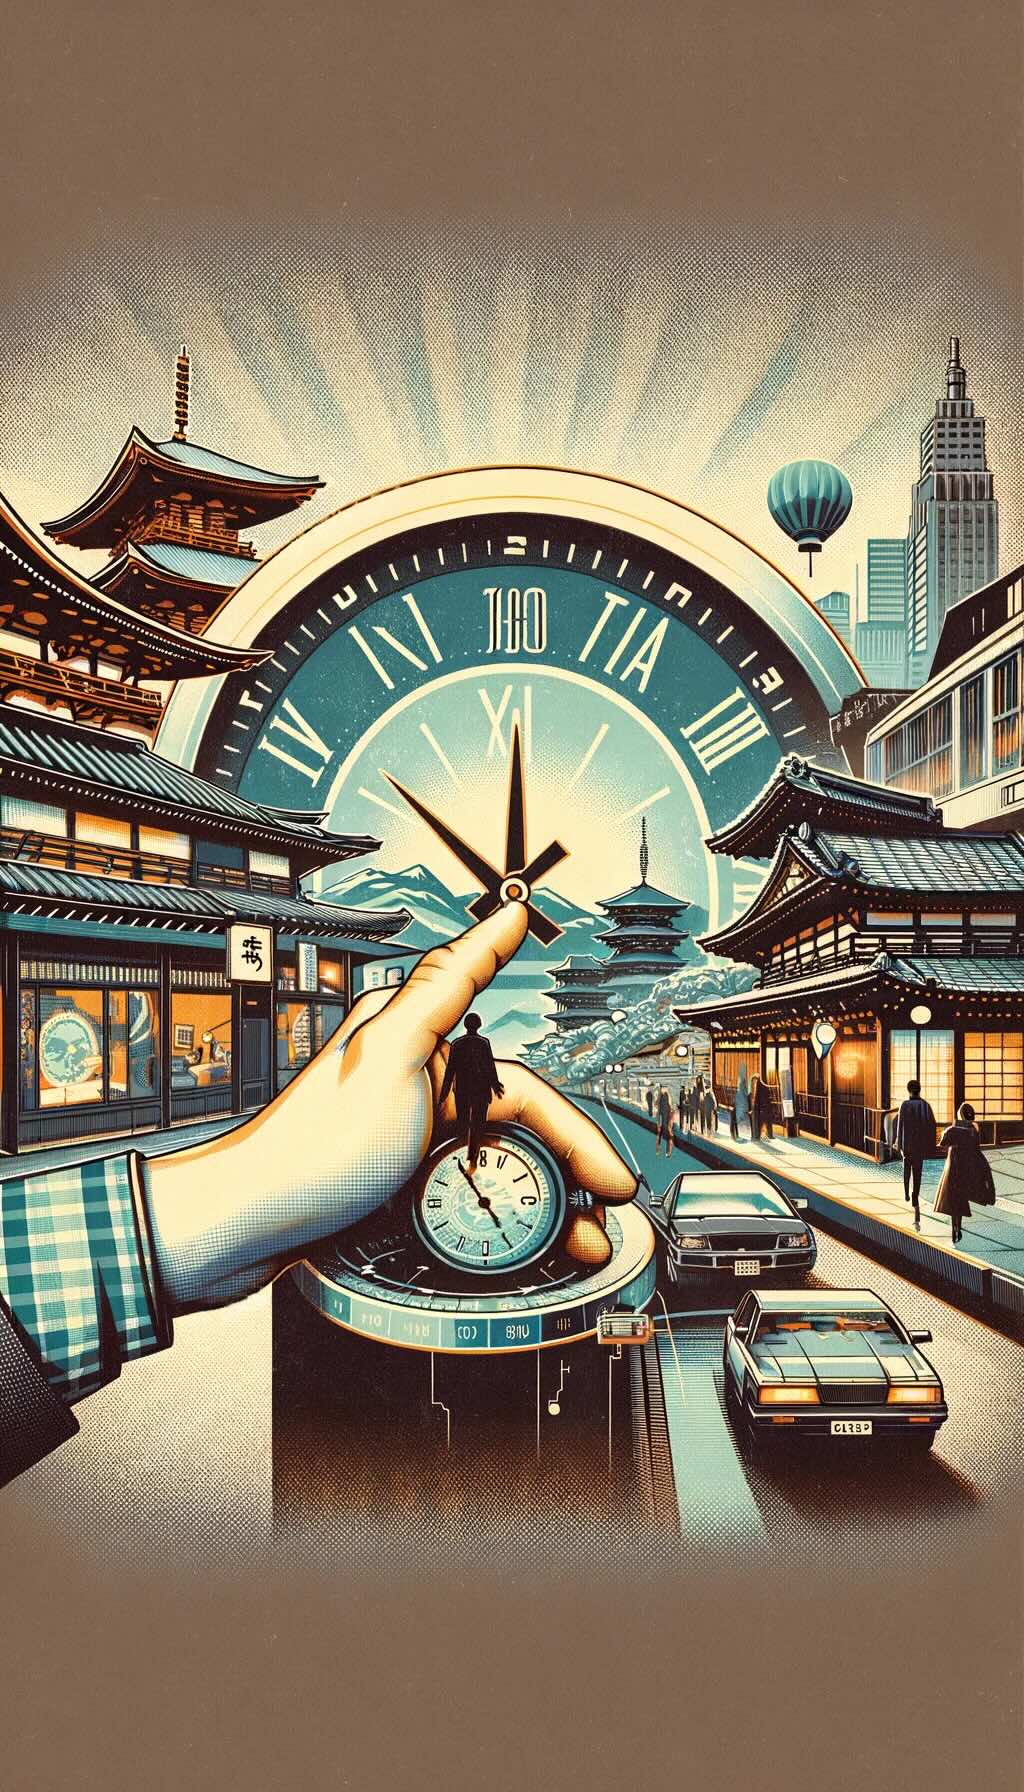 Cultural significance of Japan Standard Time (JST) in travel depicts the integration of a traveler with Japan's time zone, symbolizing the adaptation to the rhythm of the nation. The artwork illustrates scenes that reflect the bustling streets of Tokyo and the serene temples of Kyoto, emphasizing the respect for time and punctuality in Japanese culture. Additionally, it includes elements that represent global connectedness and the importance of time zone awareness in modern travel. The image shows a traveler adjusting their watch to JST, planning itineraries, or scheduling calls across different time zones. This artwork conveys the concept of cultural literacy and the ability to build bridges across time and space